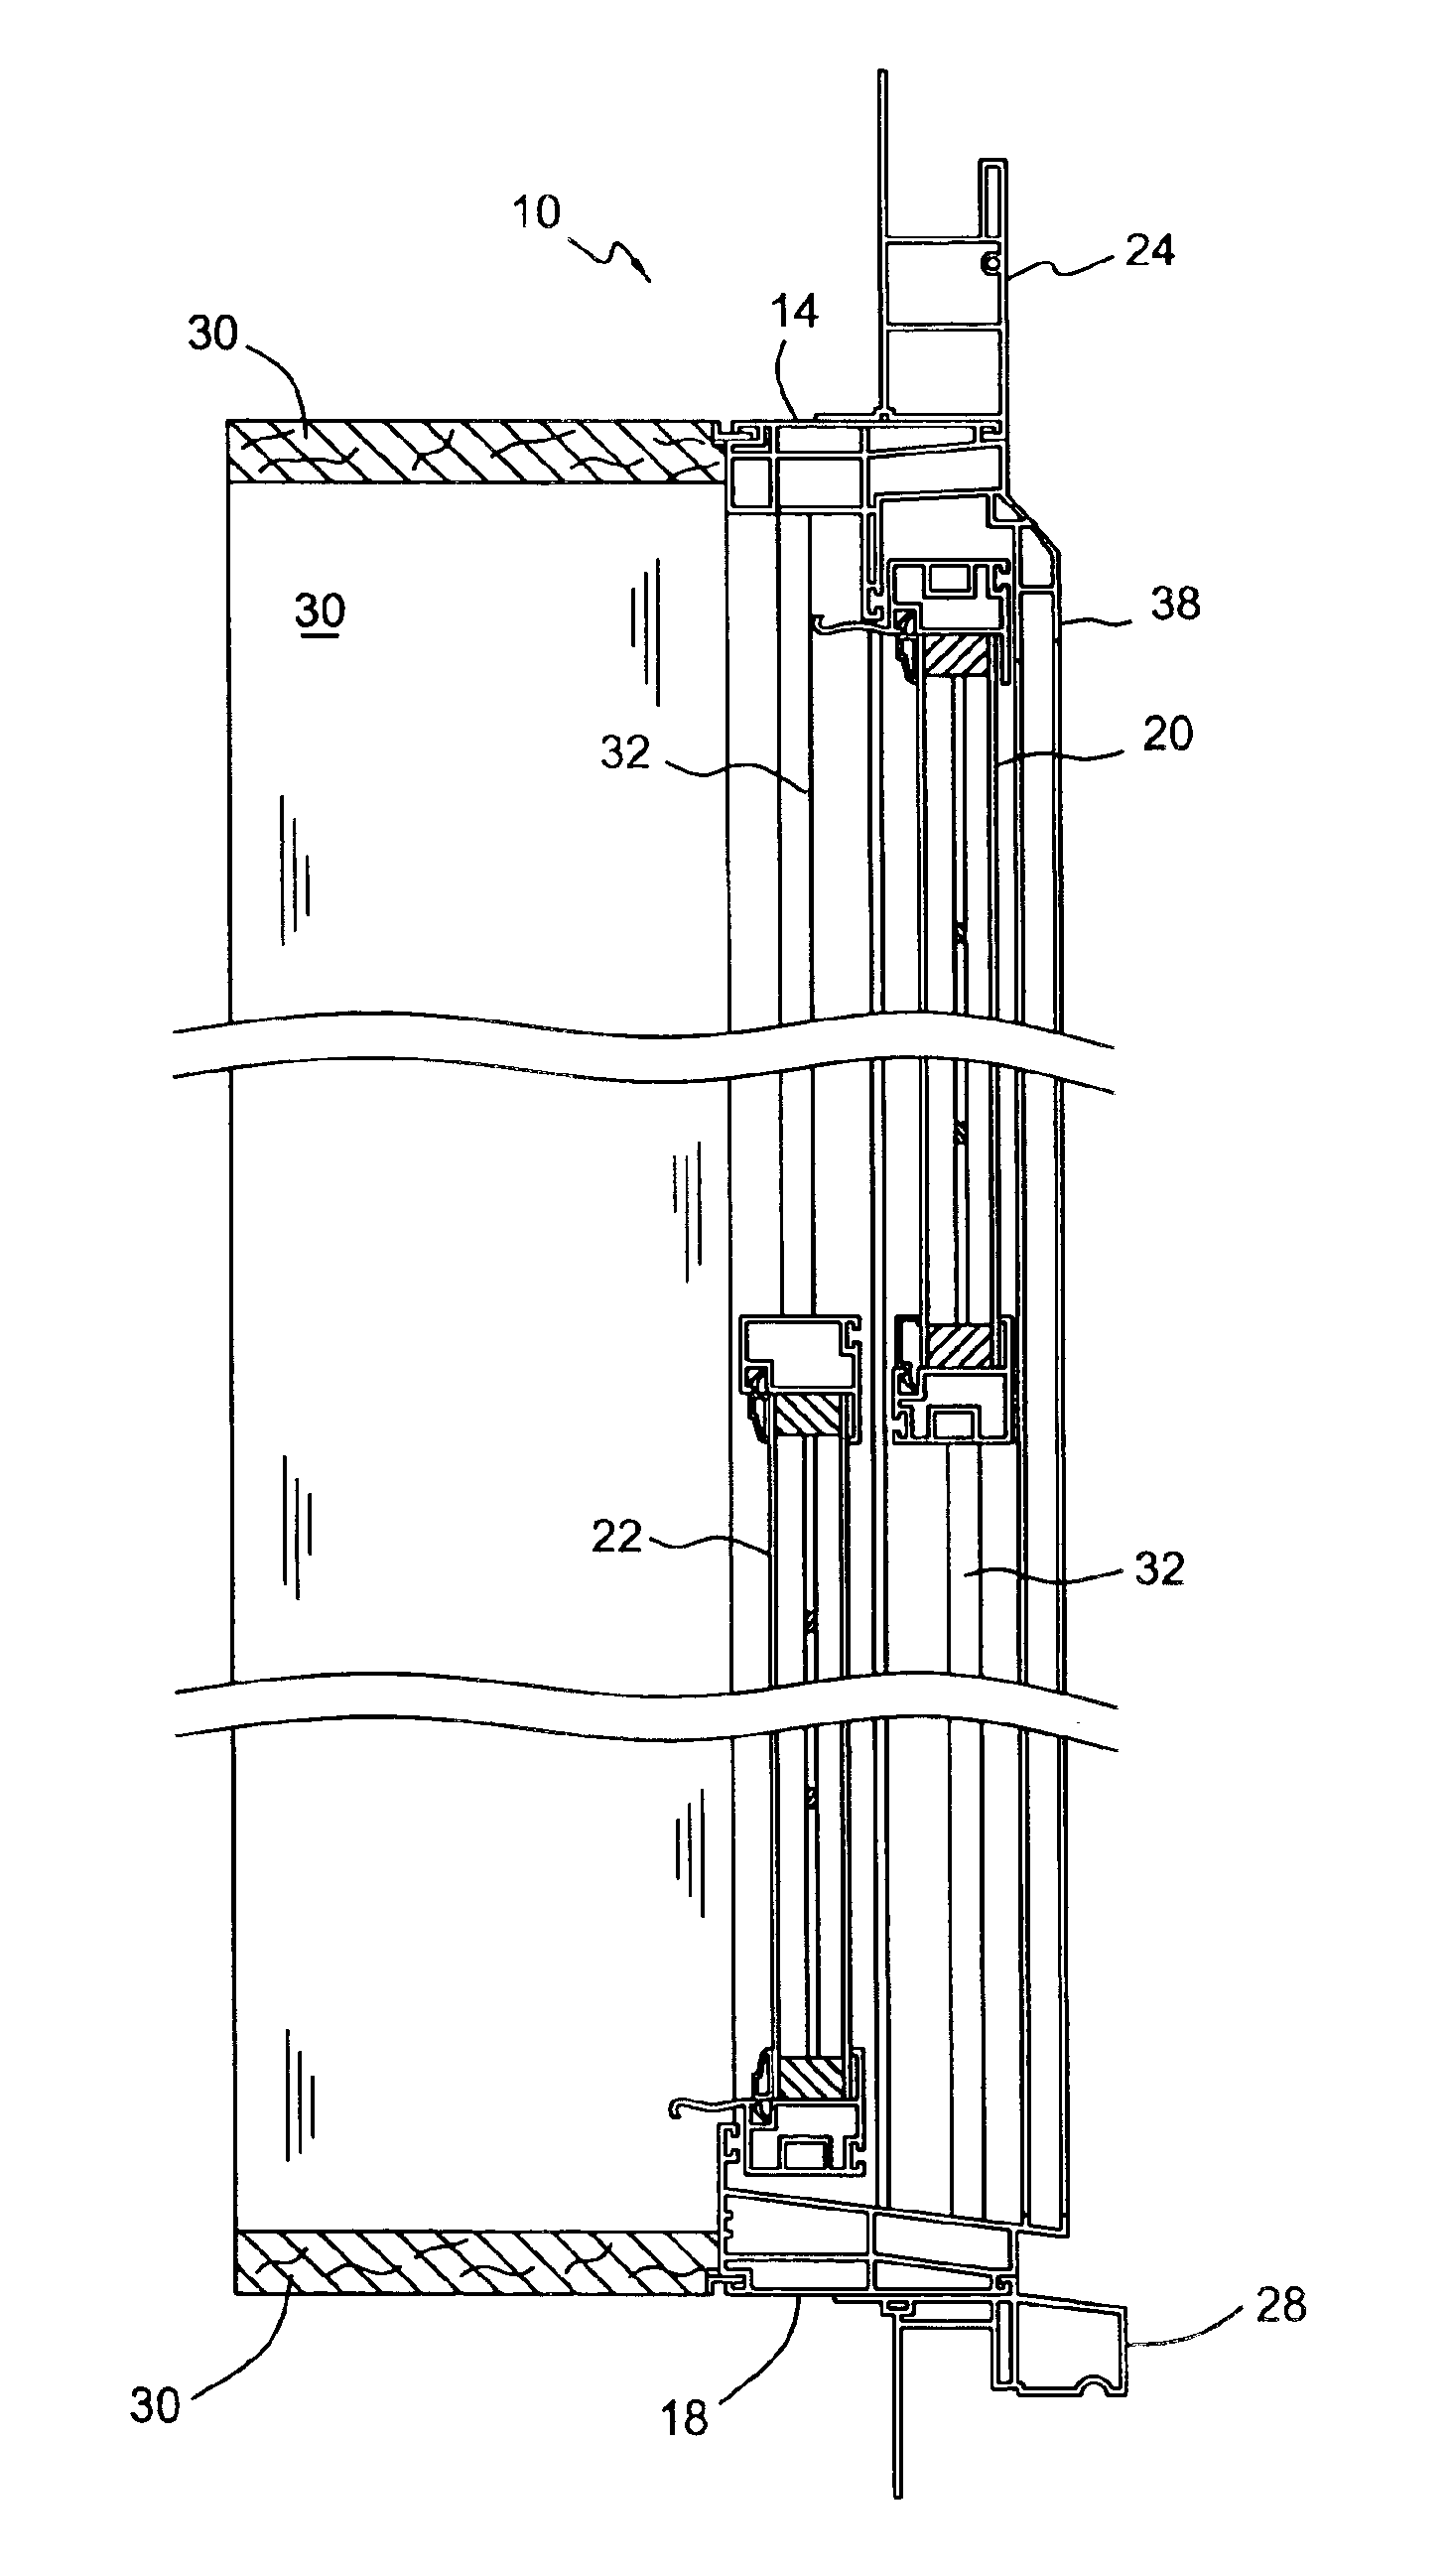 Window construction with integrated sill and casing and method of making same